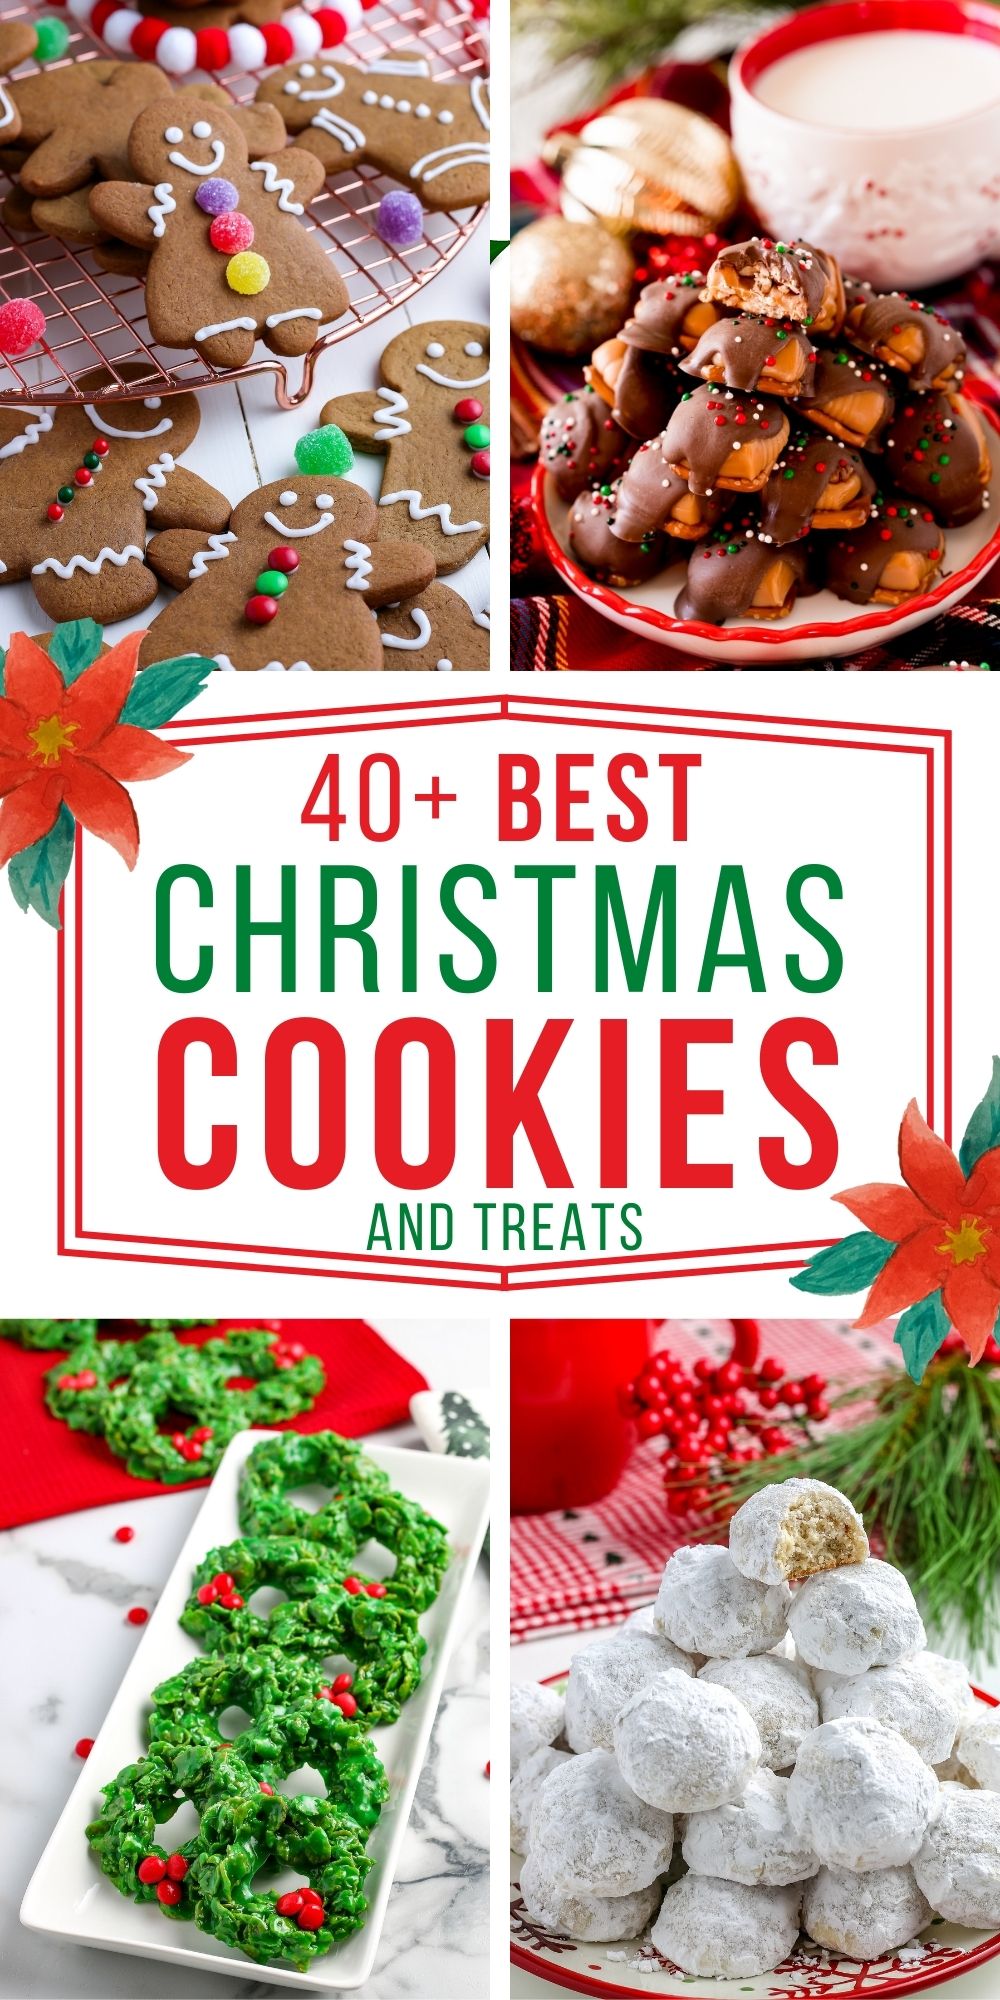 A picture collage of Christmas Cookies and Christmas Treats.